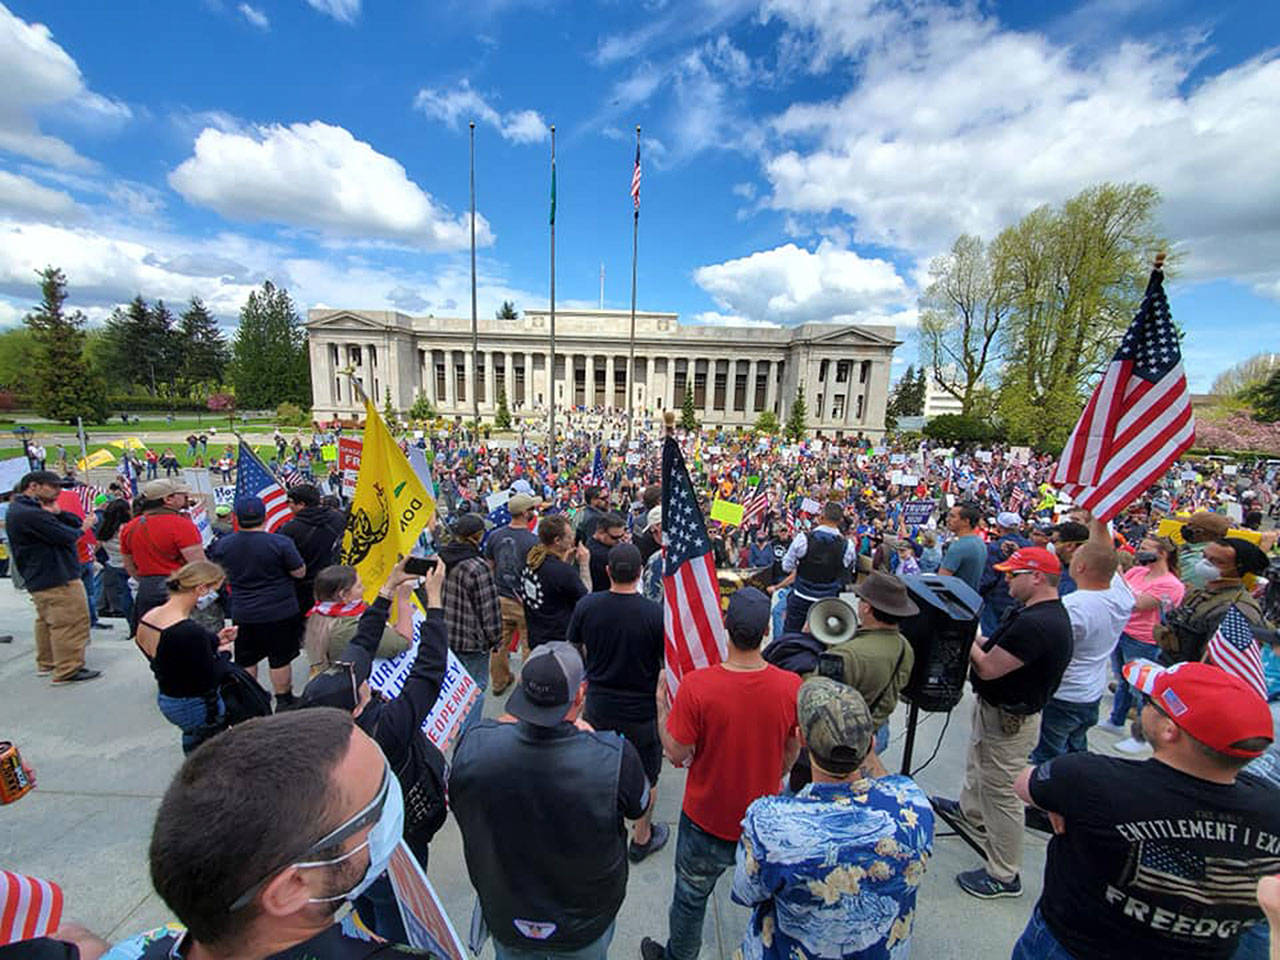 Although the Seattle Times estimated more than 2,000 people showed up at the Hazardous Liberty! rally on April 19 at the state Capitol, other estimates top 3,000 attendees. Photo courtesy Patrick Nelson